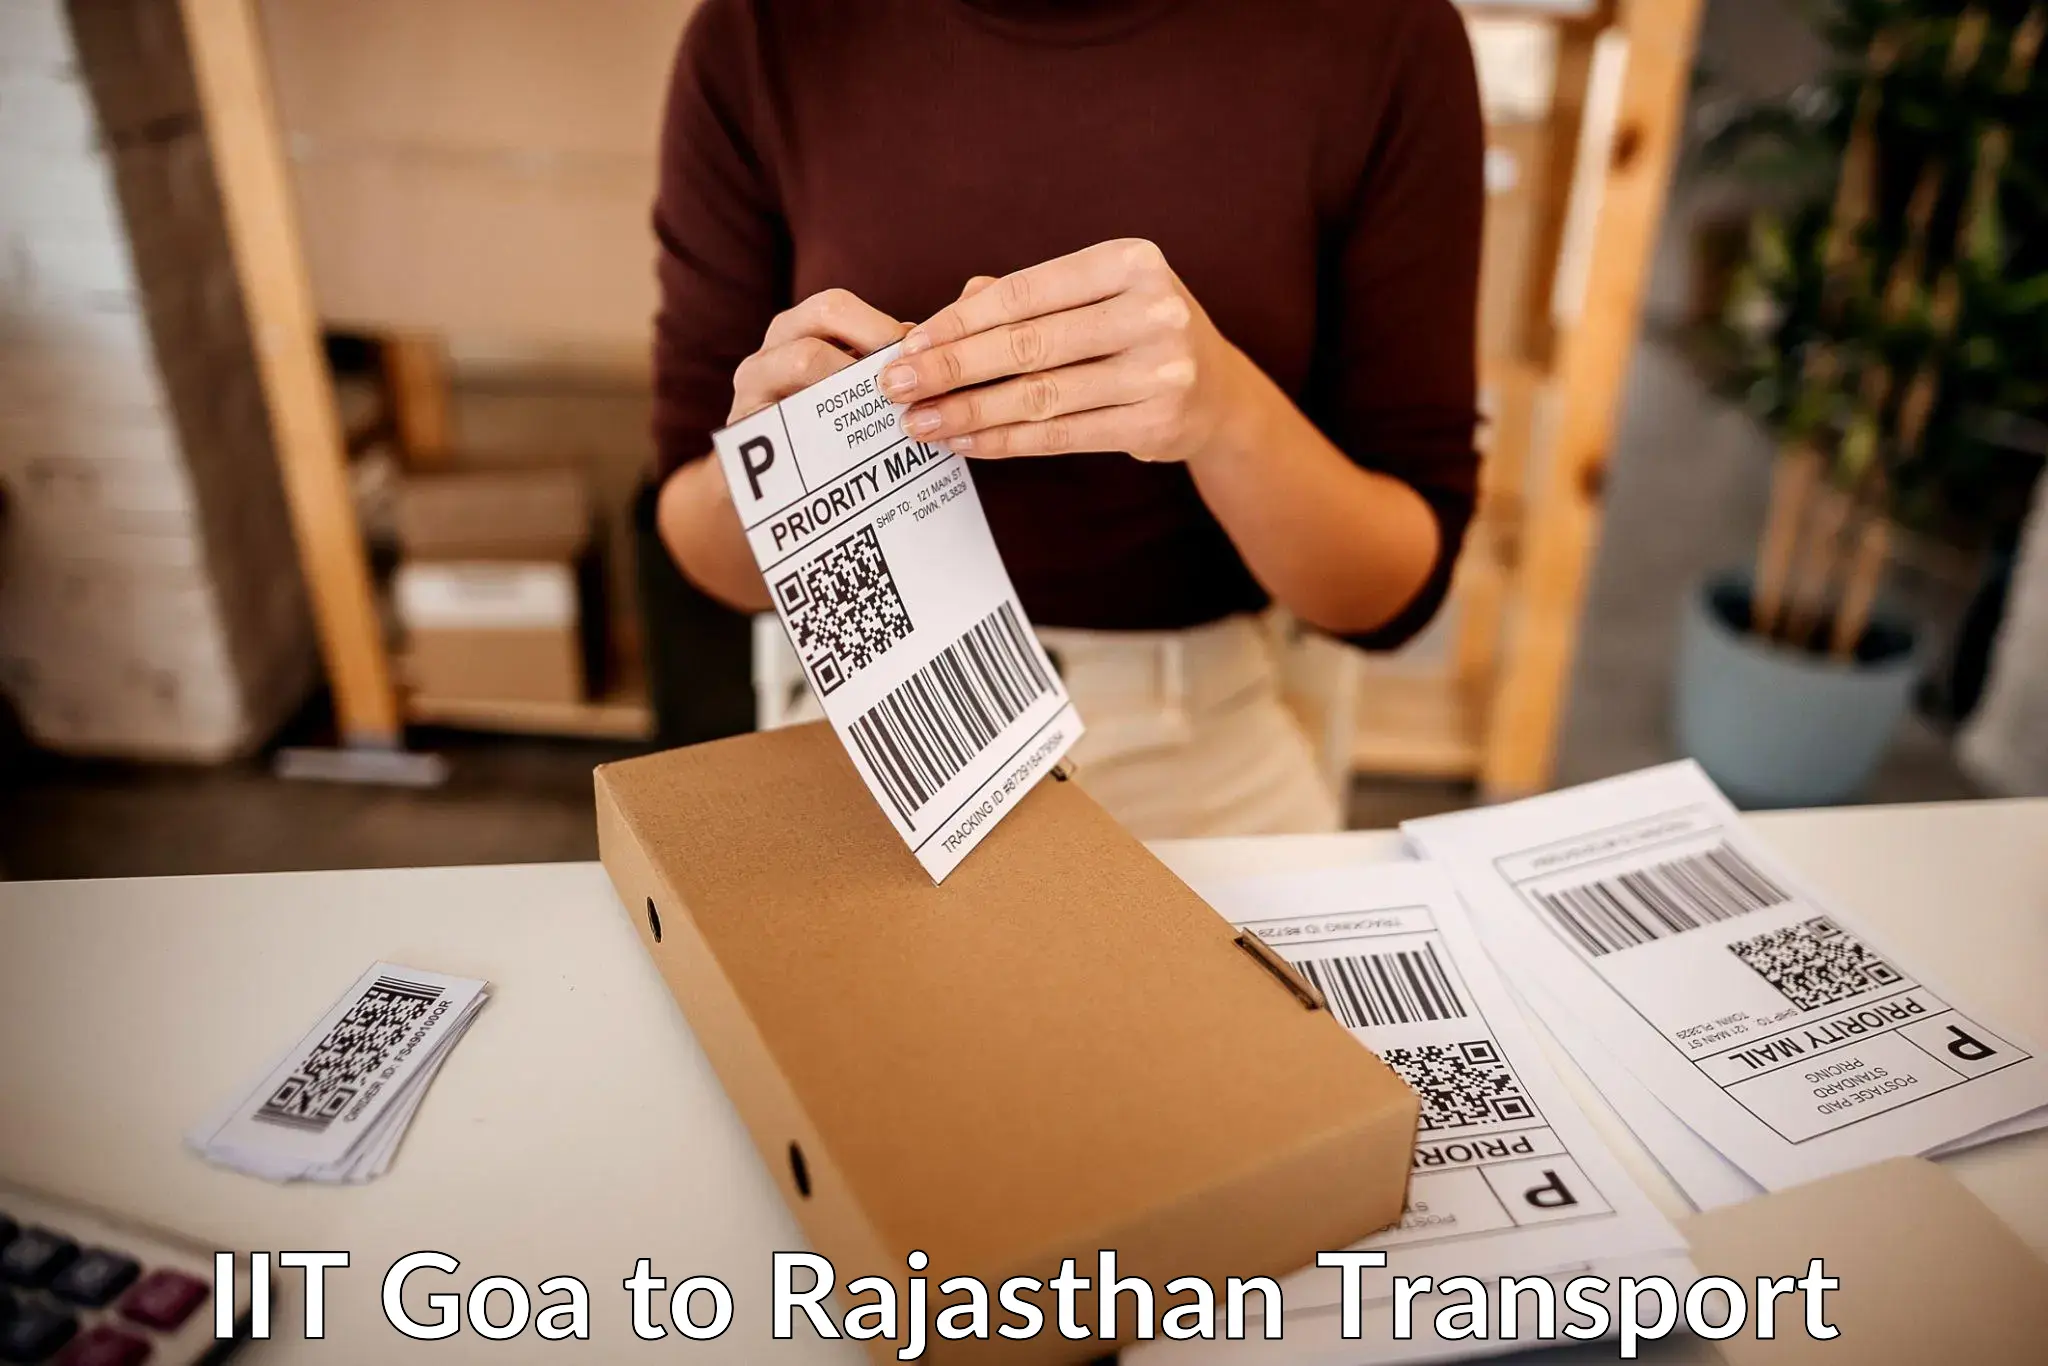 Commercial transport service IIT Goa to Ajmer